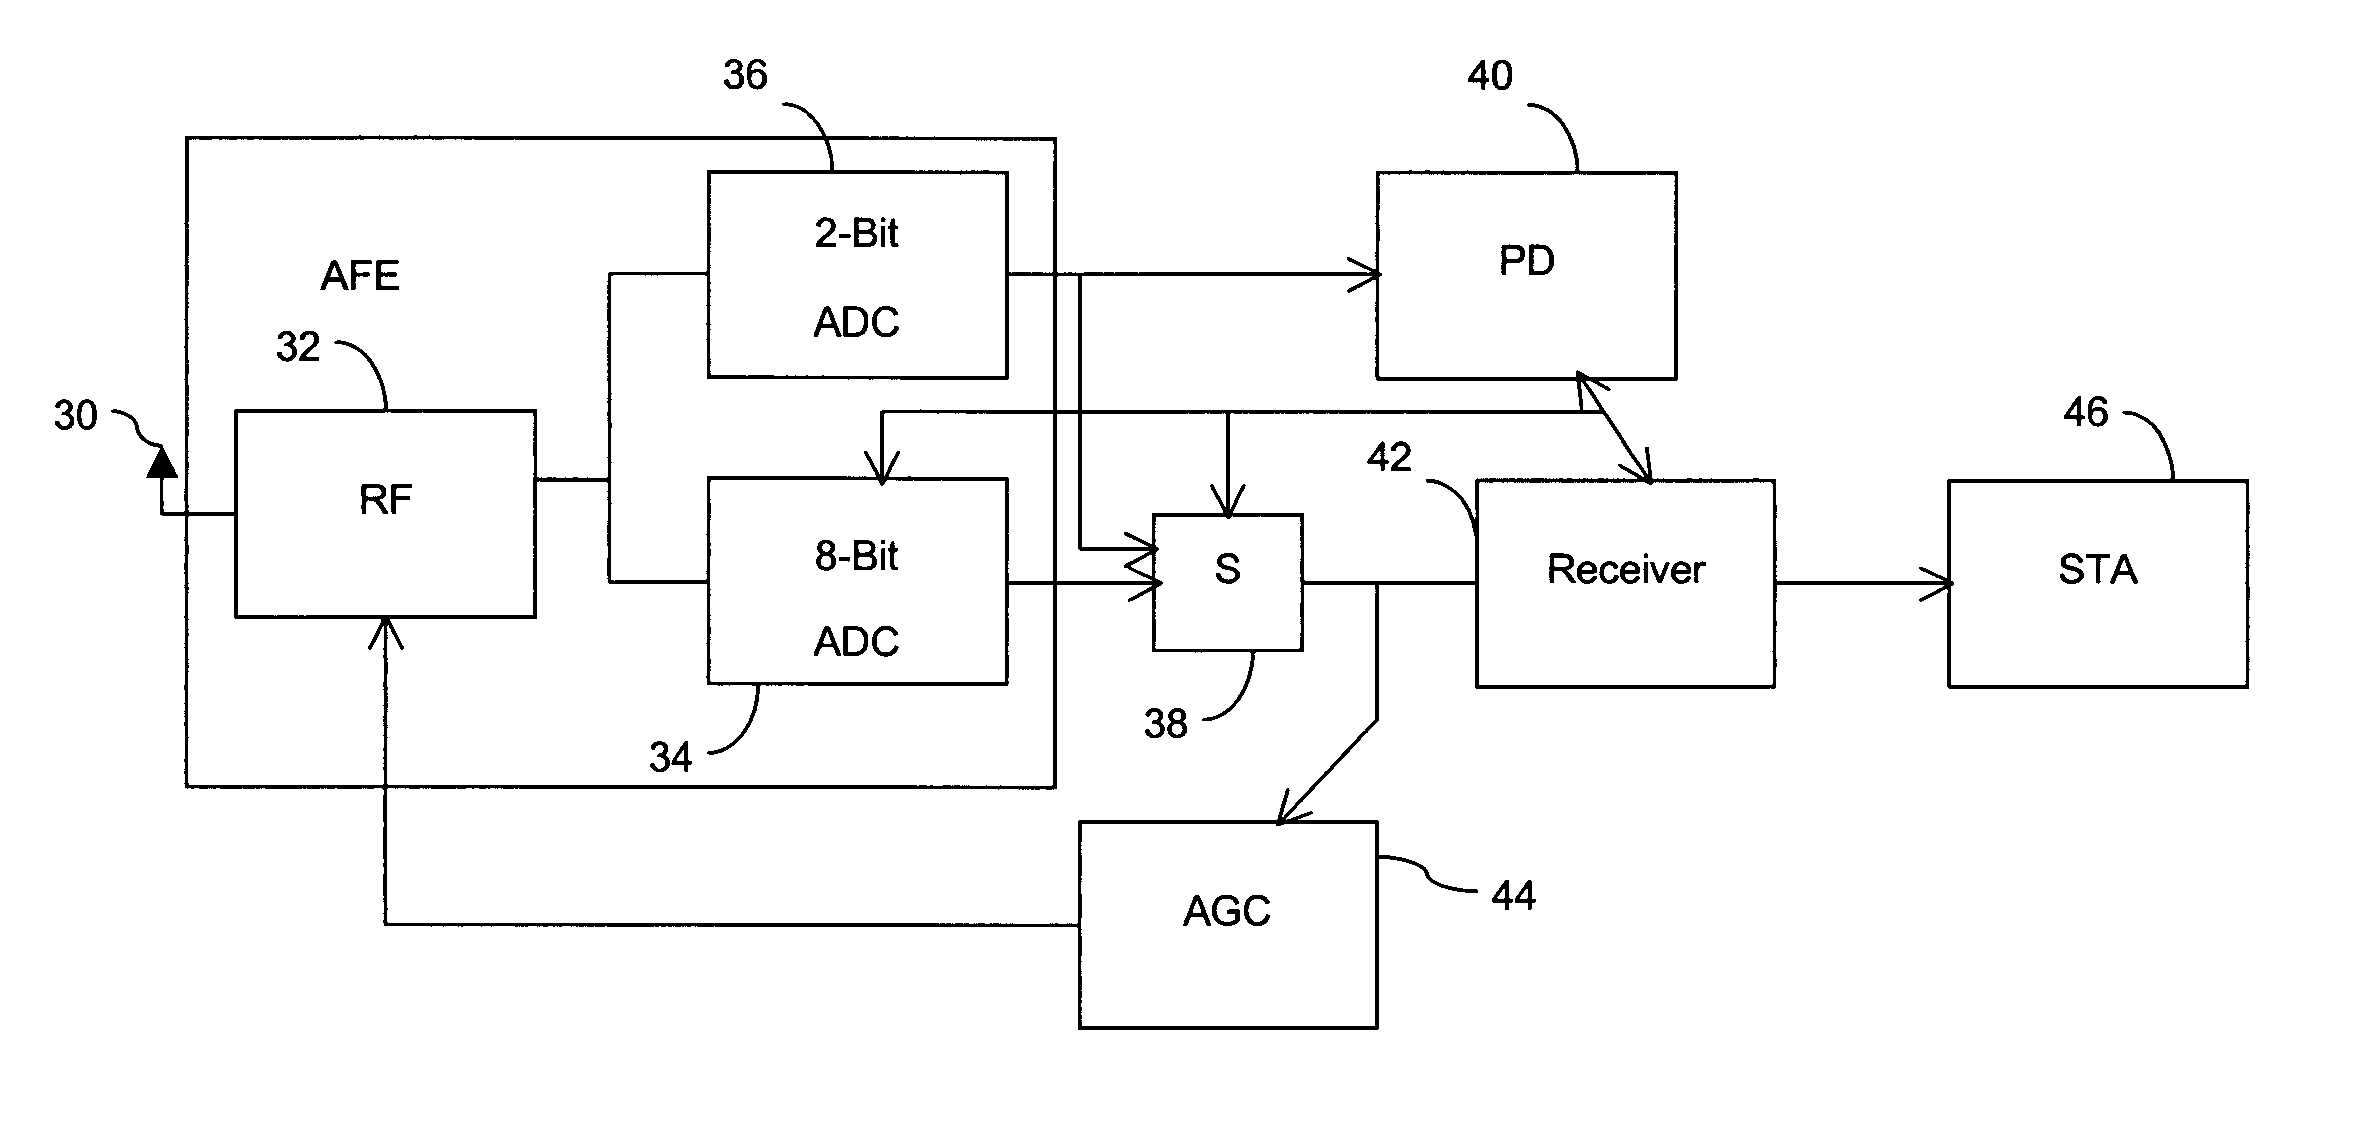 Receiver with low power listen mode in a wireless local area network